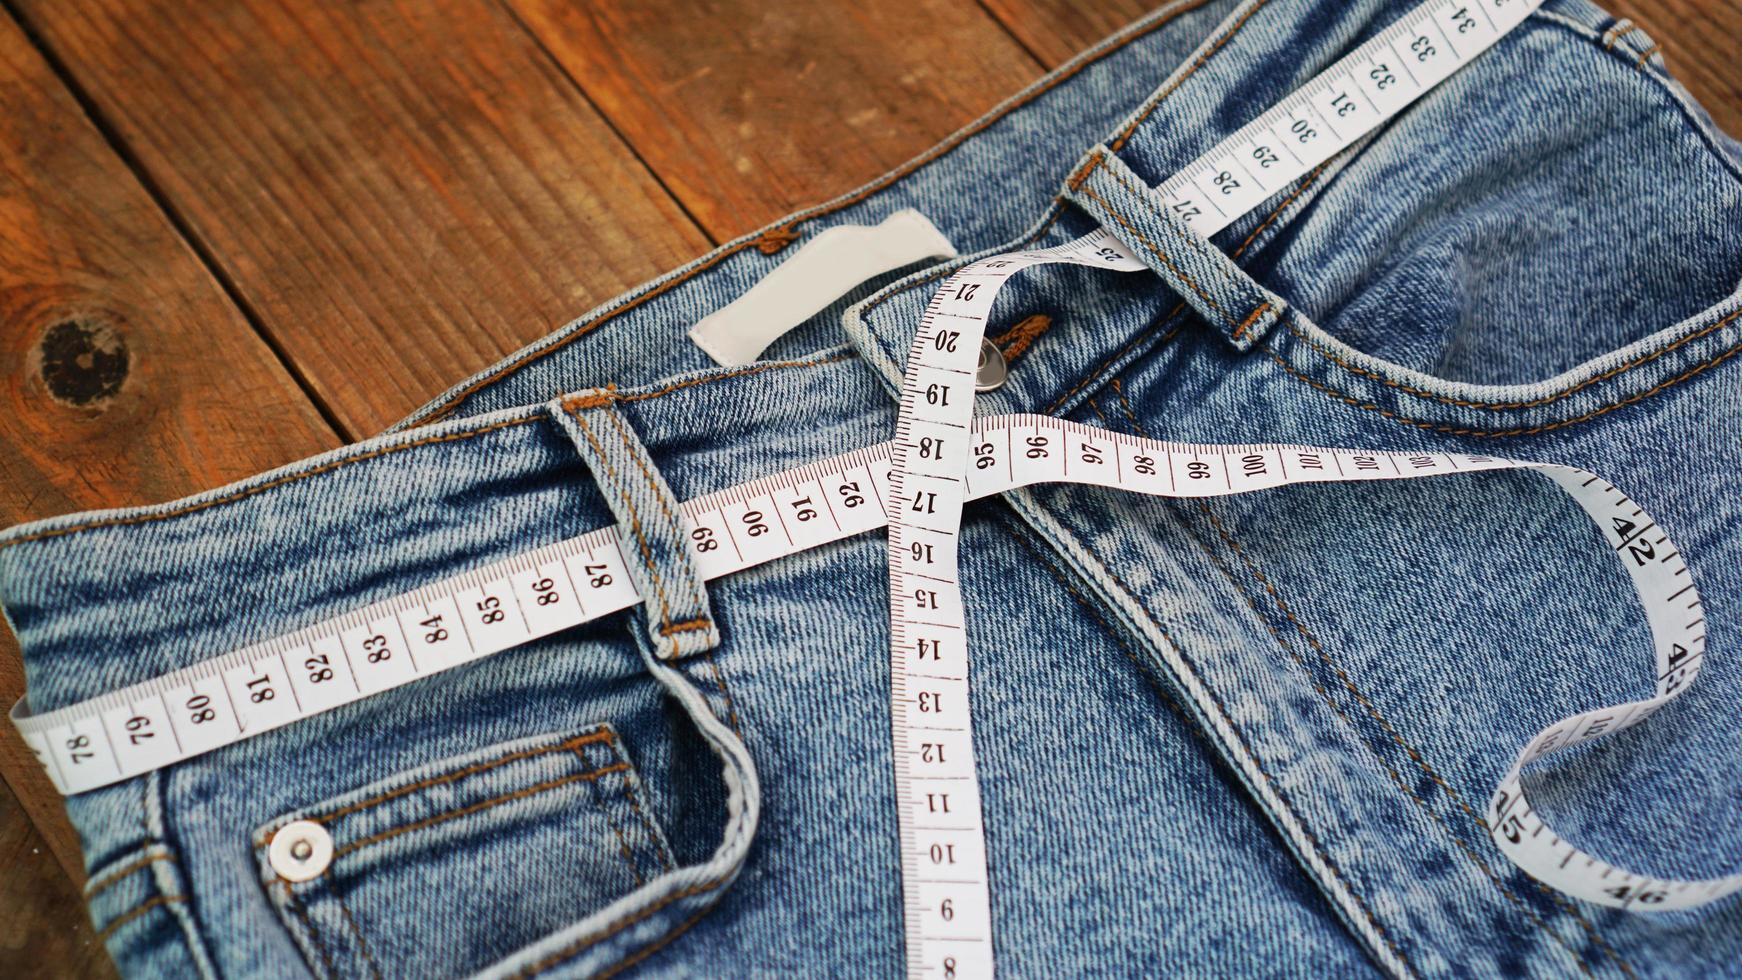 Measuring tape and jeans on a wooden background photo